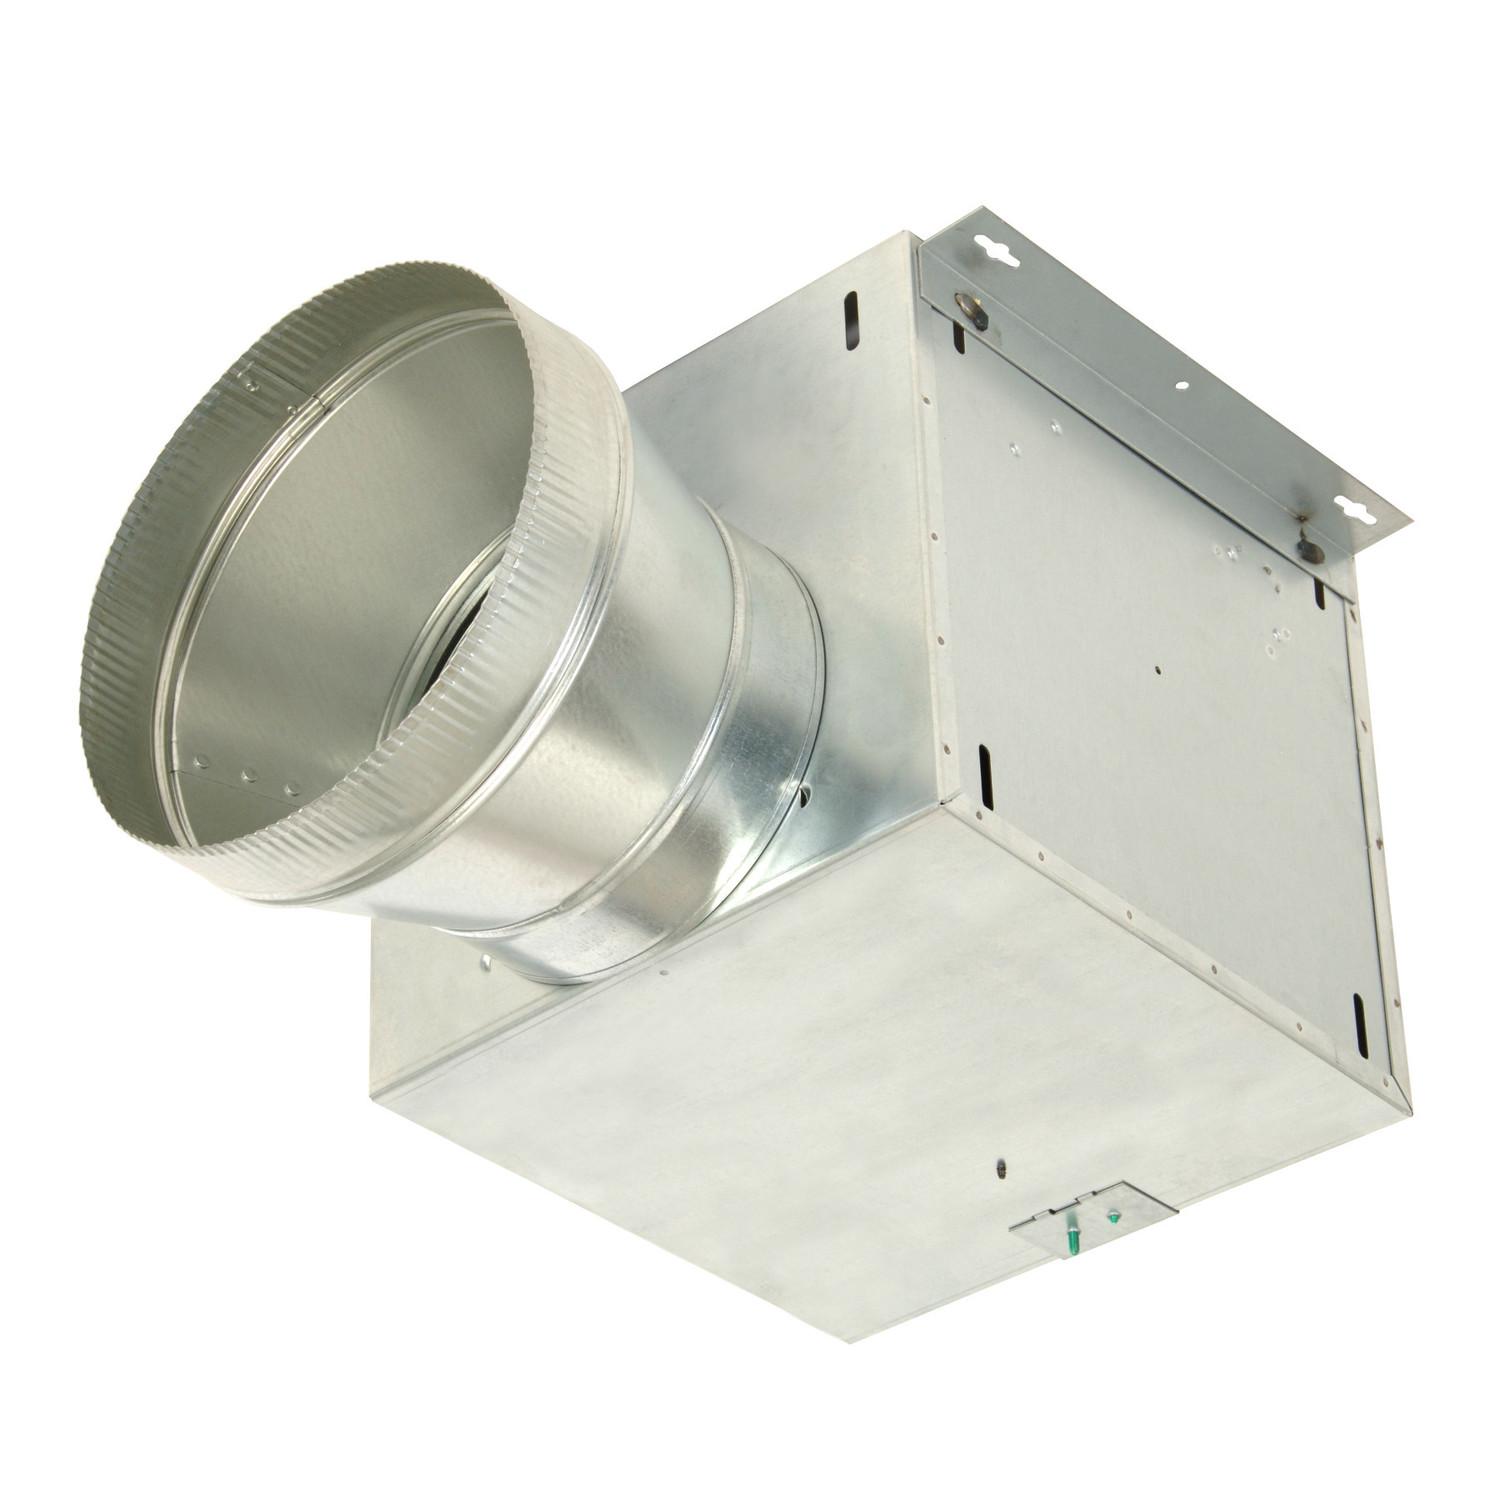 Broan 320 Max In-Line Blower CFM for use with Broan® Range Hoods